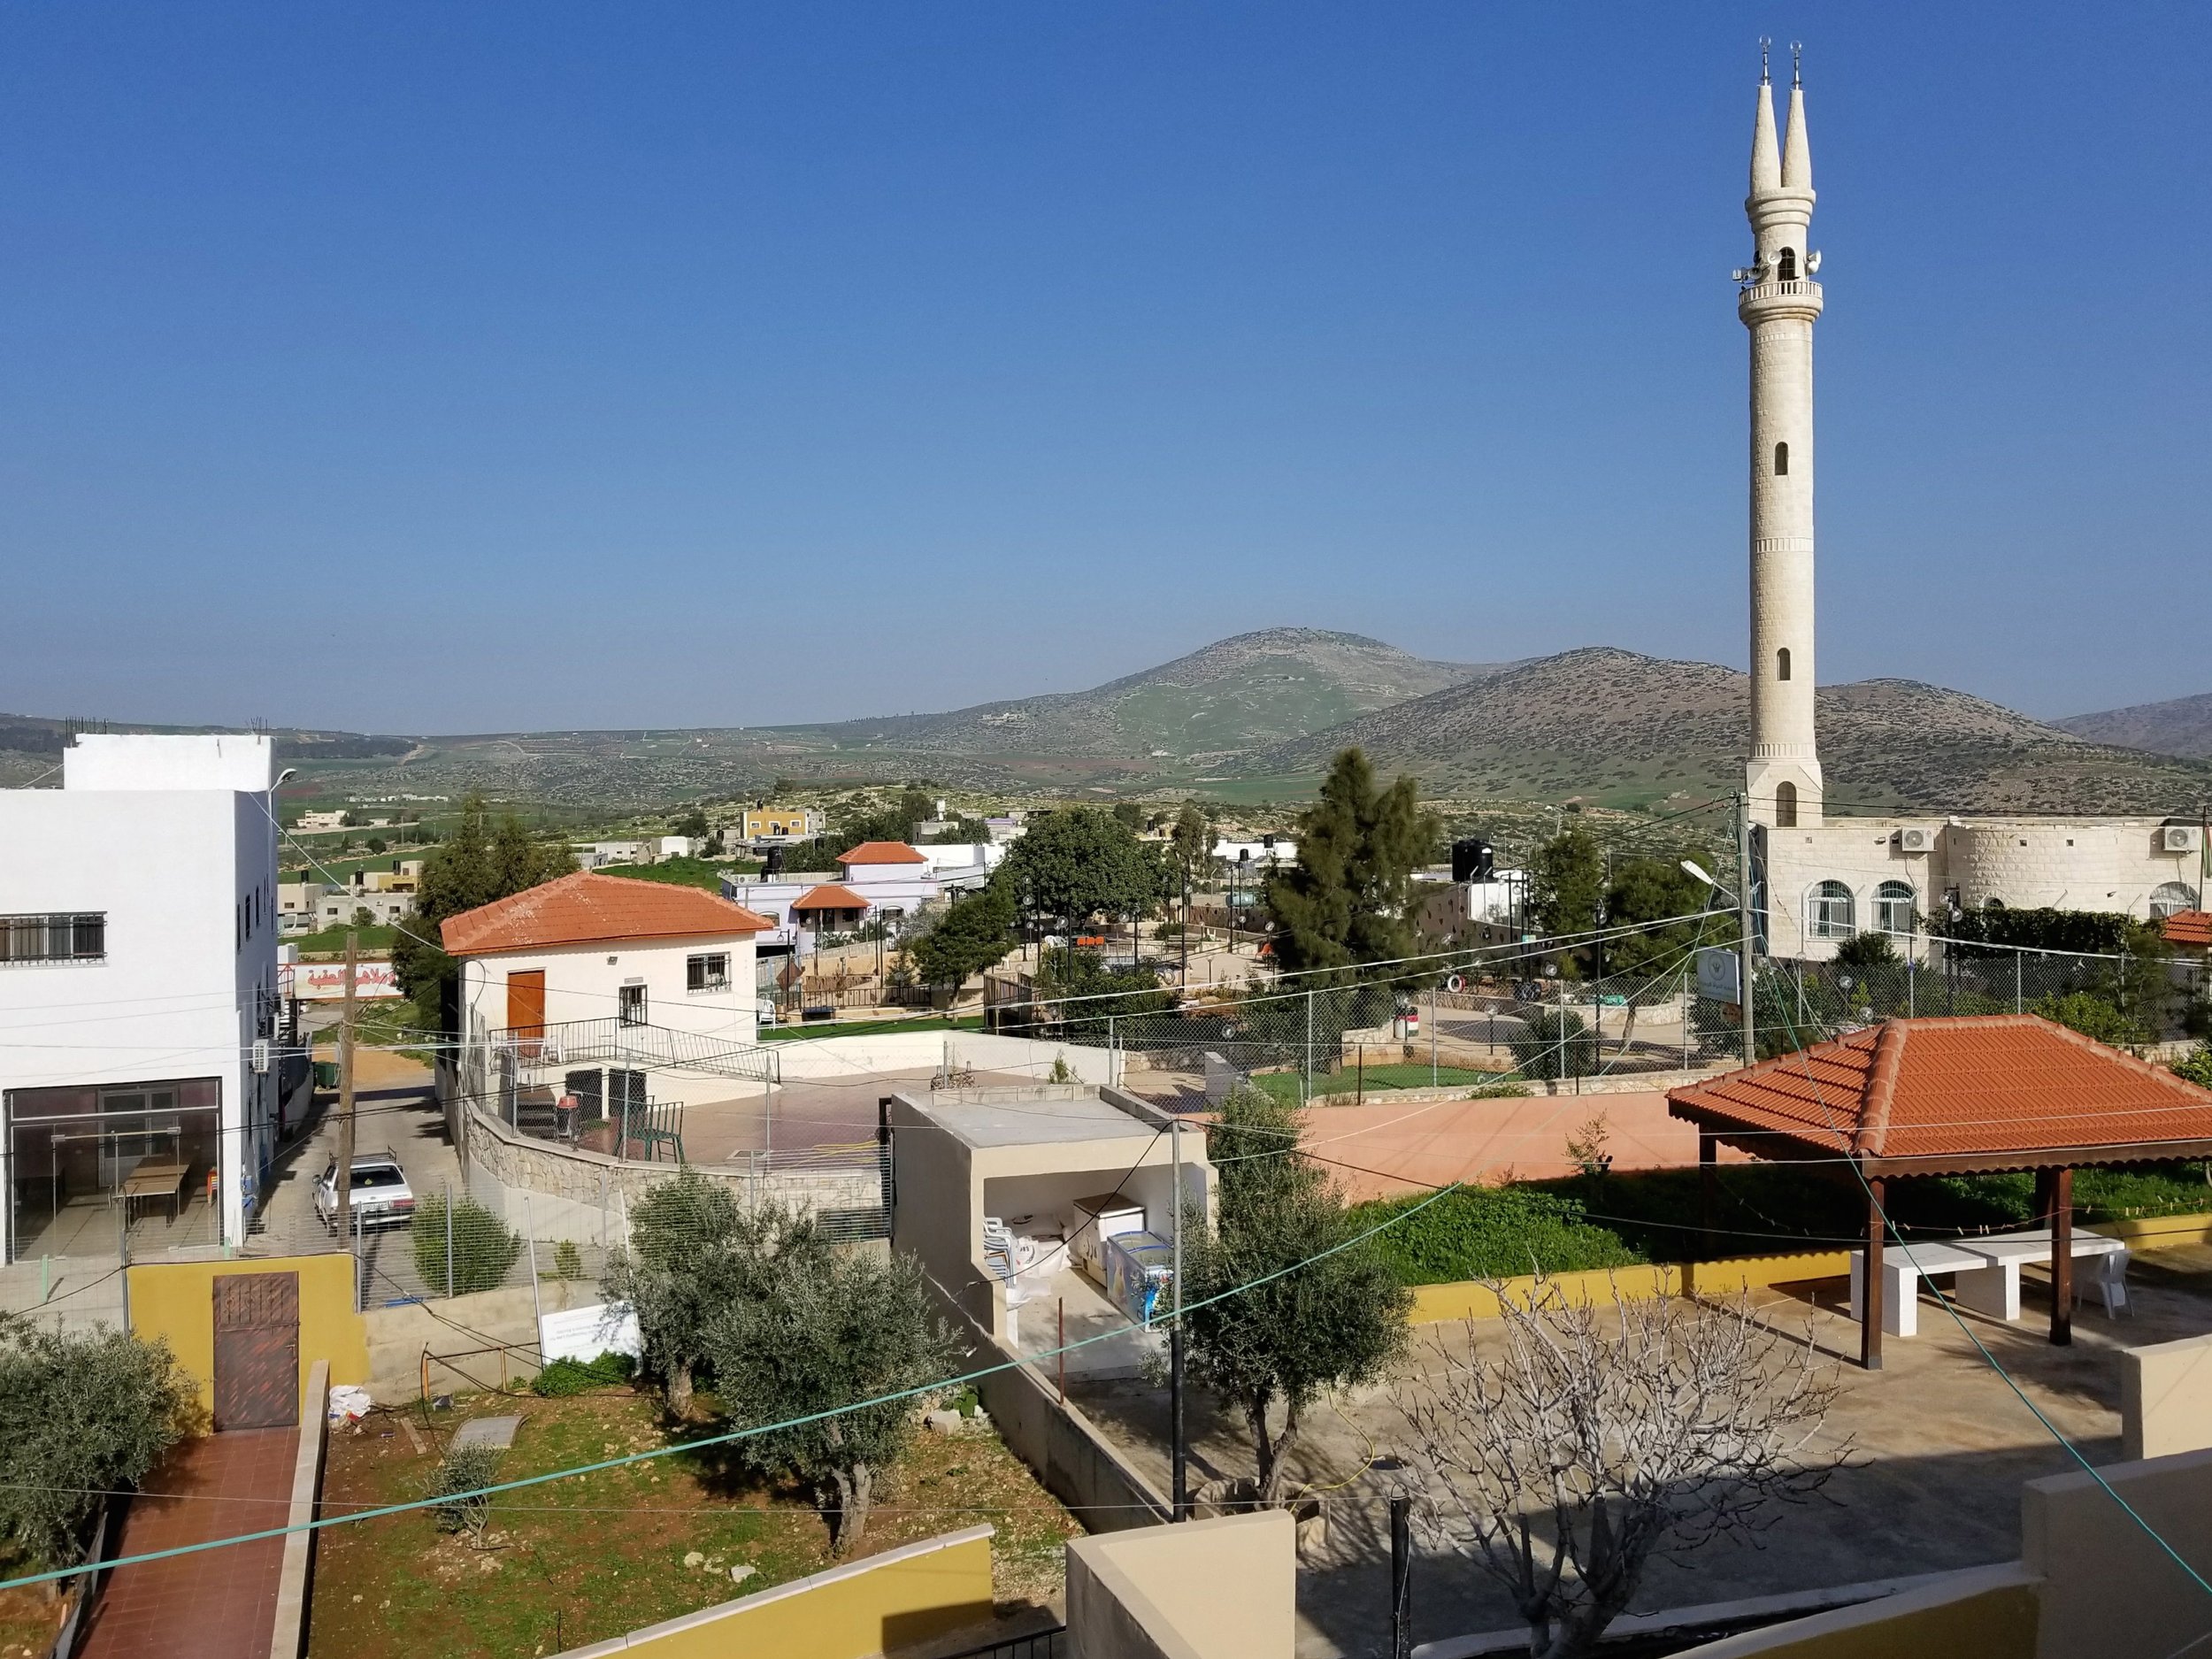 Al Aqaba Village: keeping families safe in their homes in this model of peace